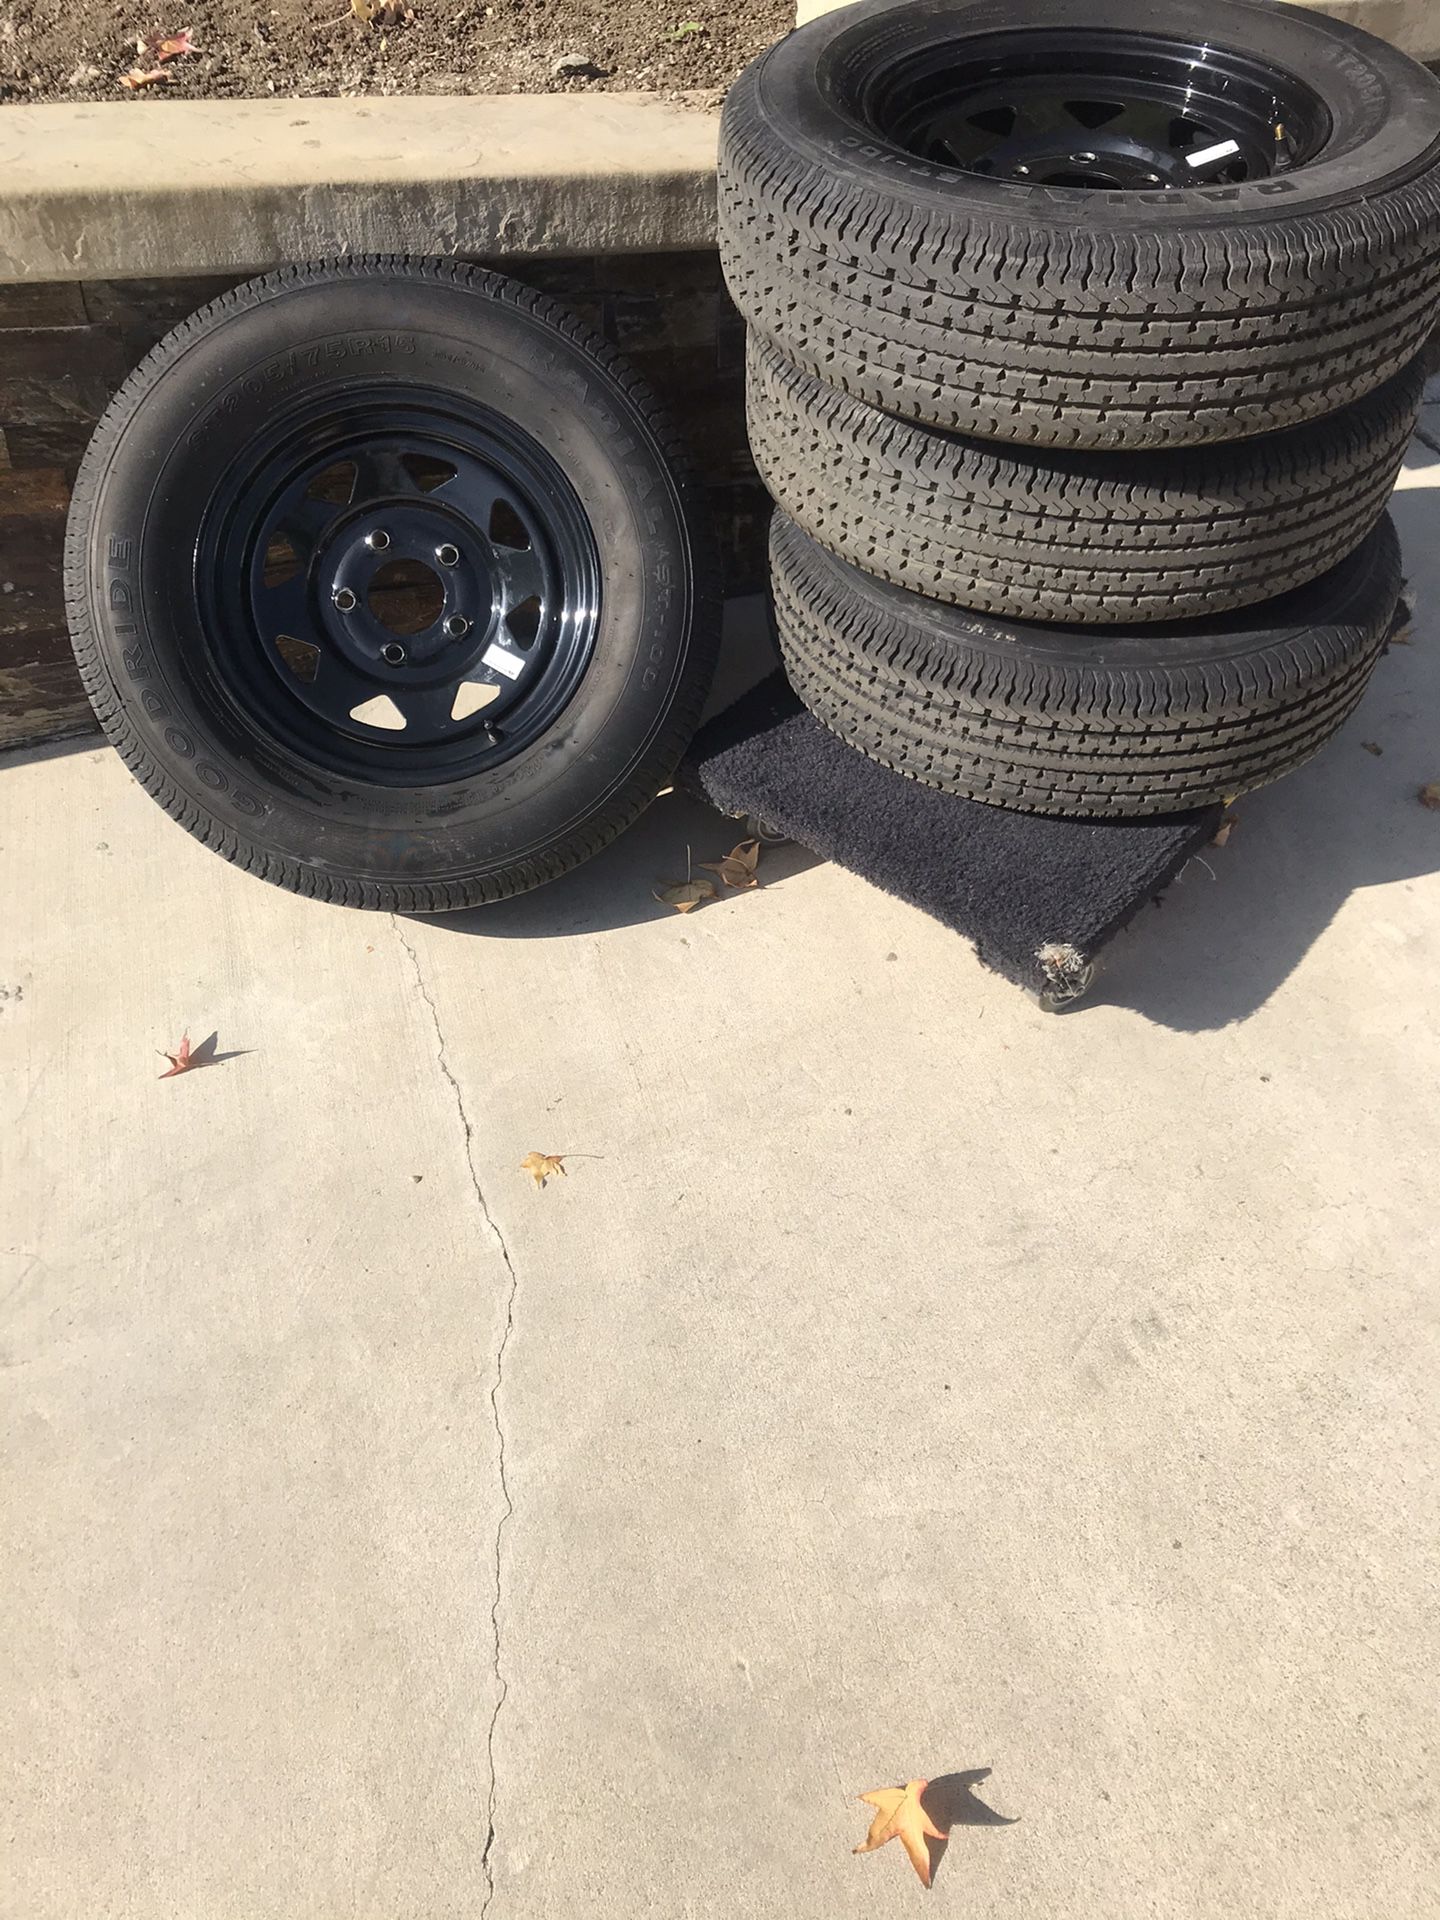 New trailer wheels and tires